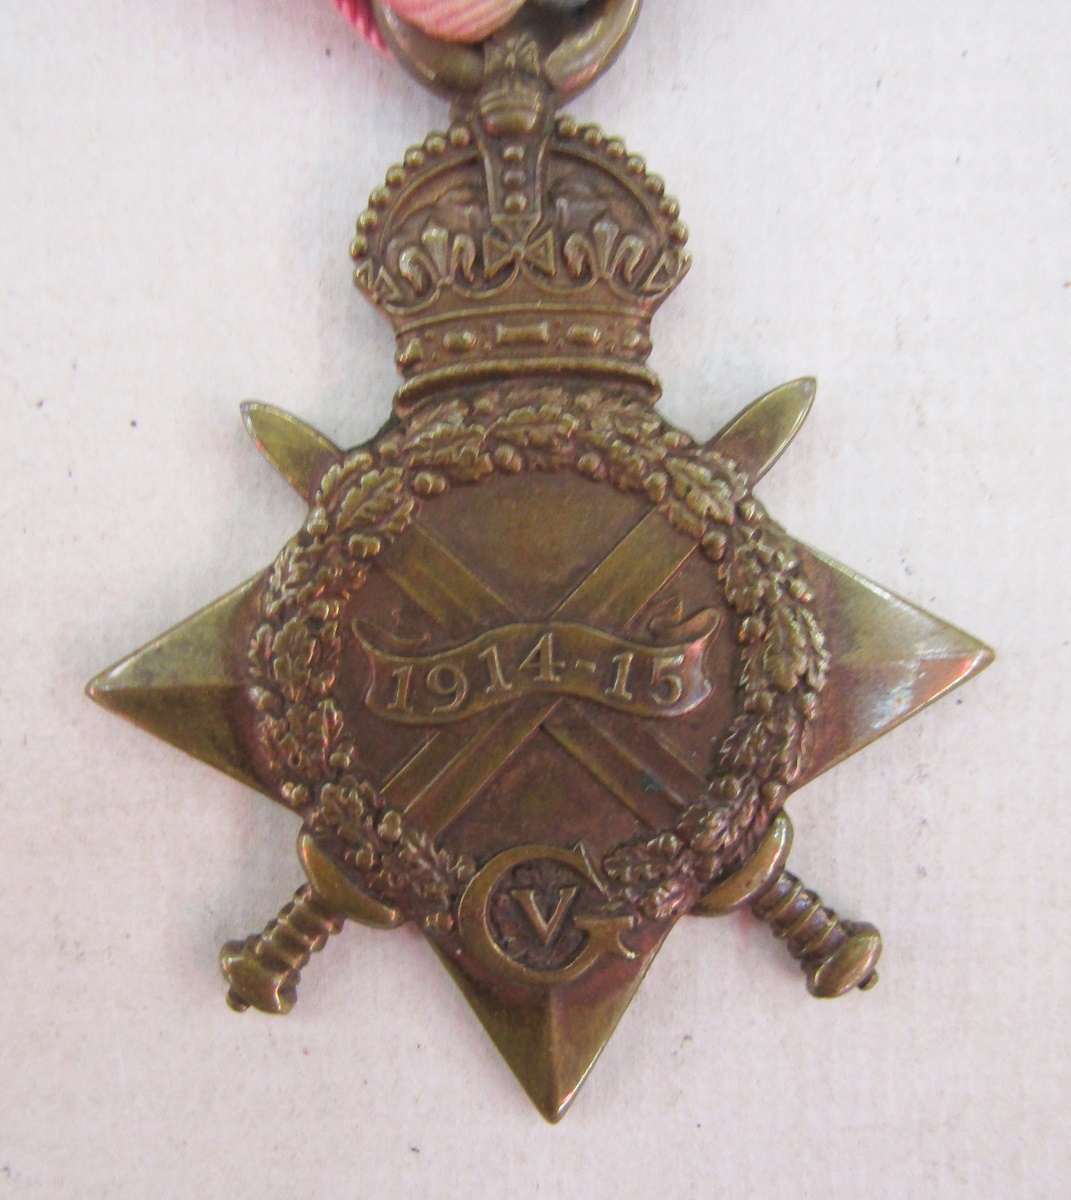 Queens South Africa medal with Belfast, Laing's Nek, Orange Free State and Defence of Ladysmith - Image 19 of 20